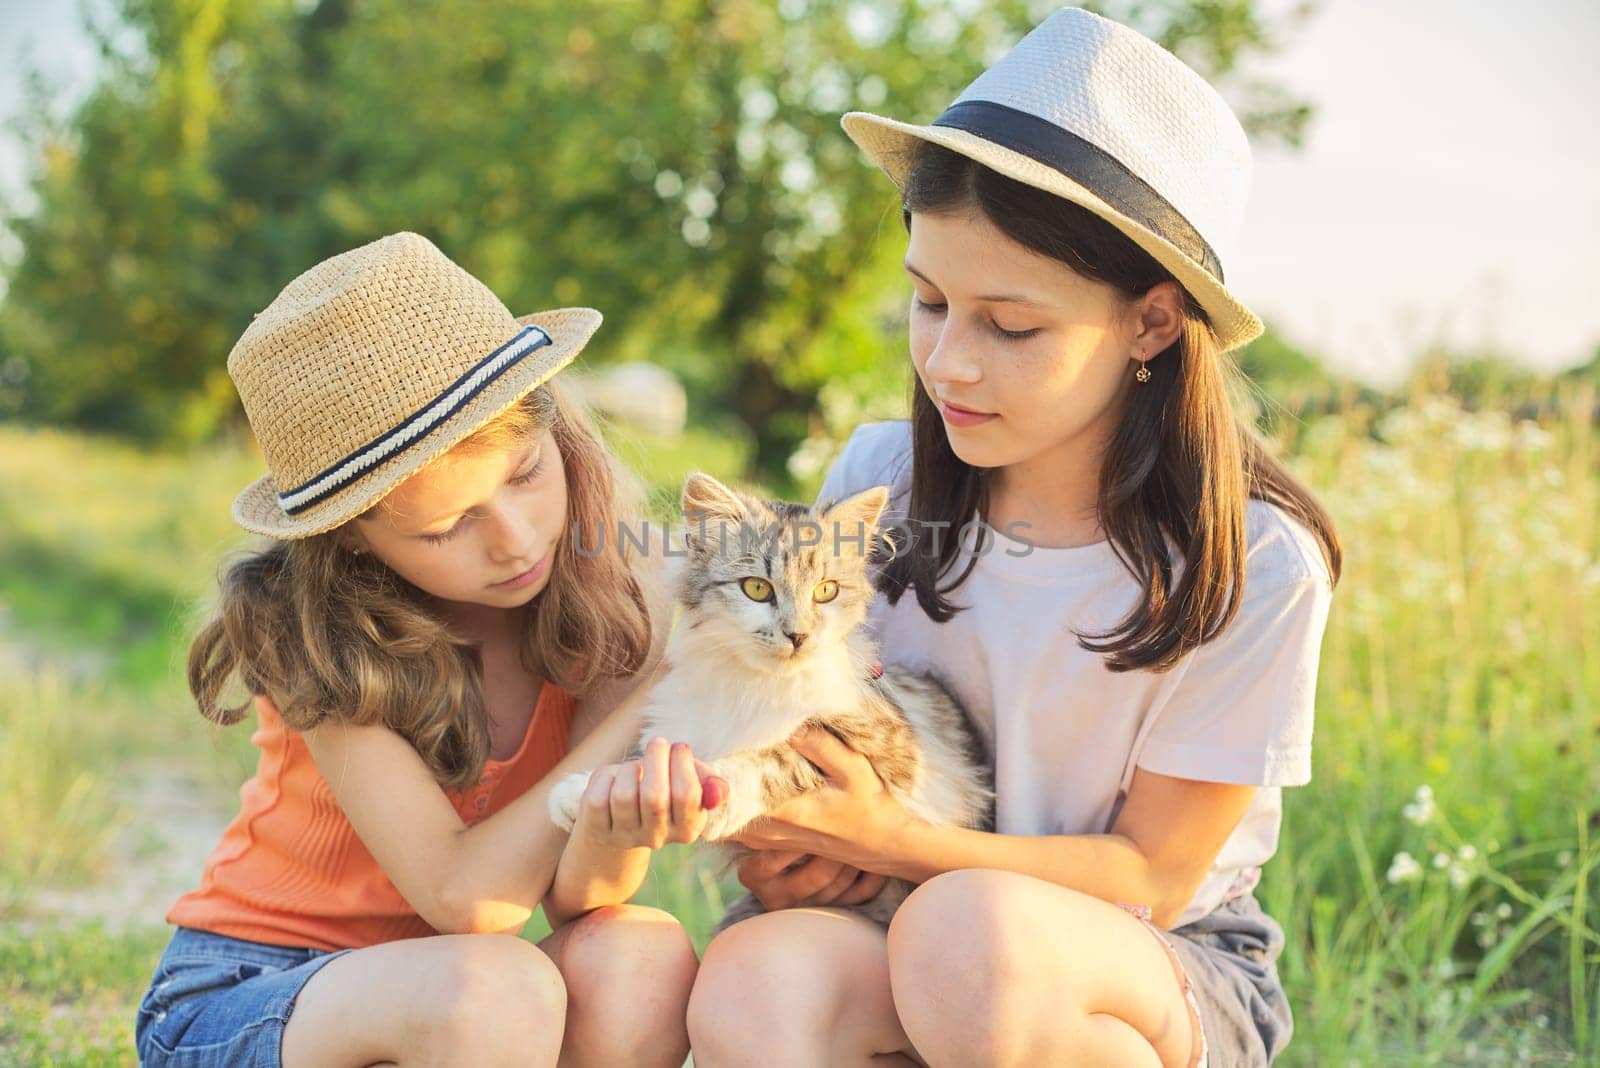 Children two girls playing with a gray fluffy cat outdoor. Beautiful sunset country landscape background